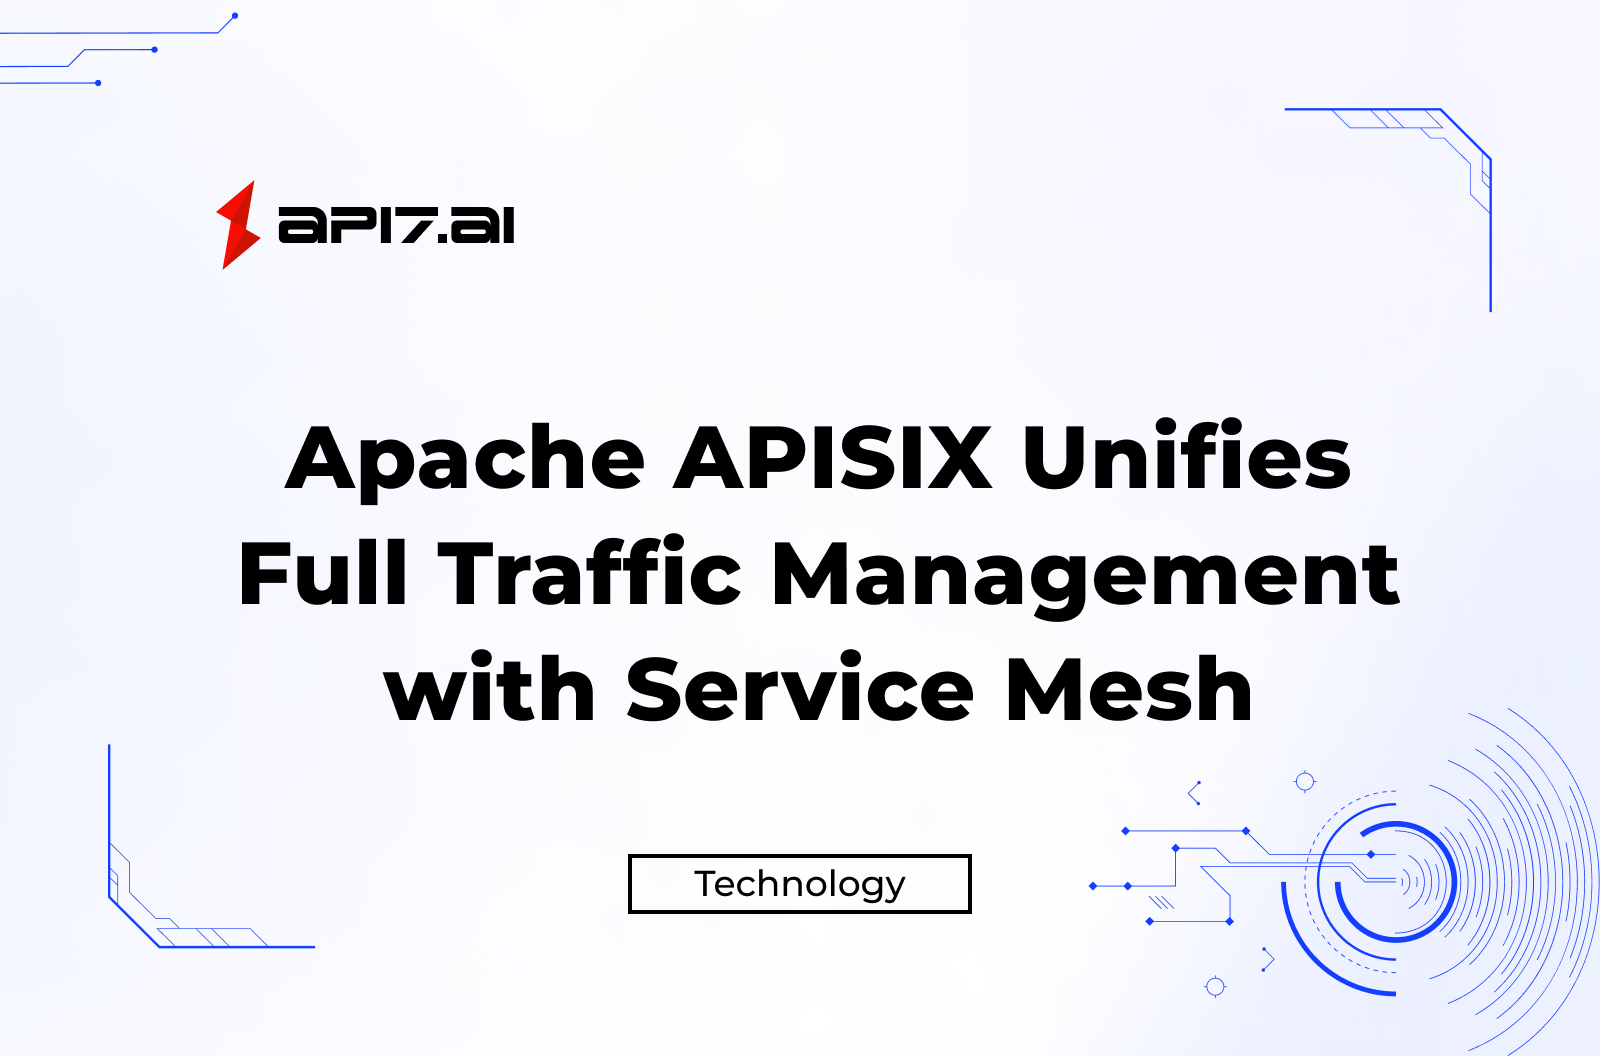 Apache APISIX Unifies Full Traffic Management with Service Mesh